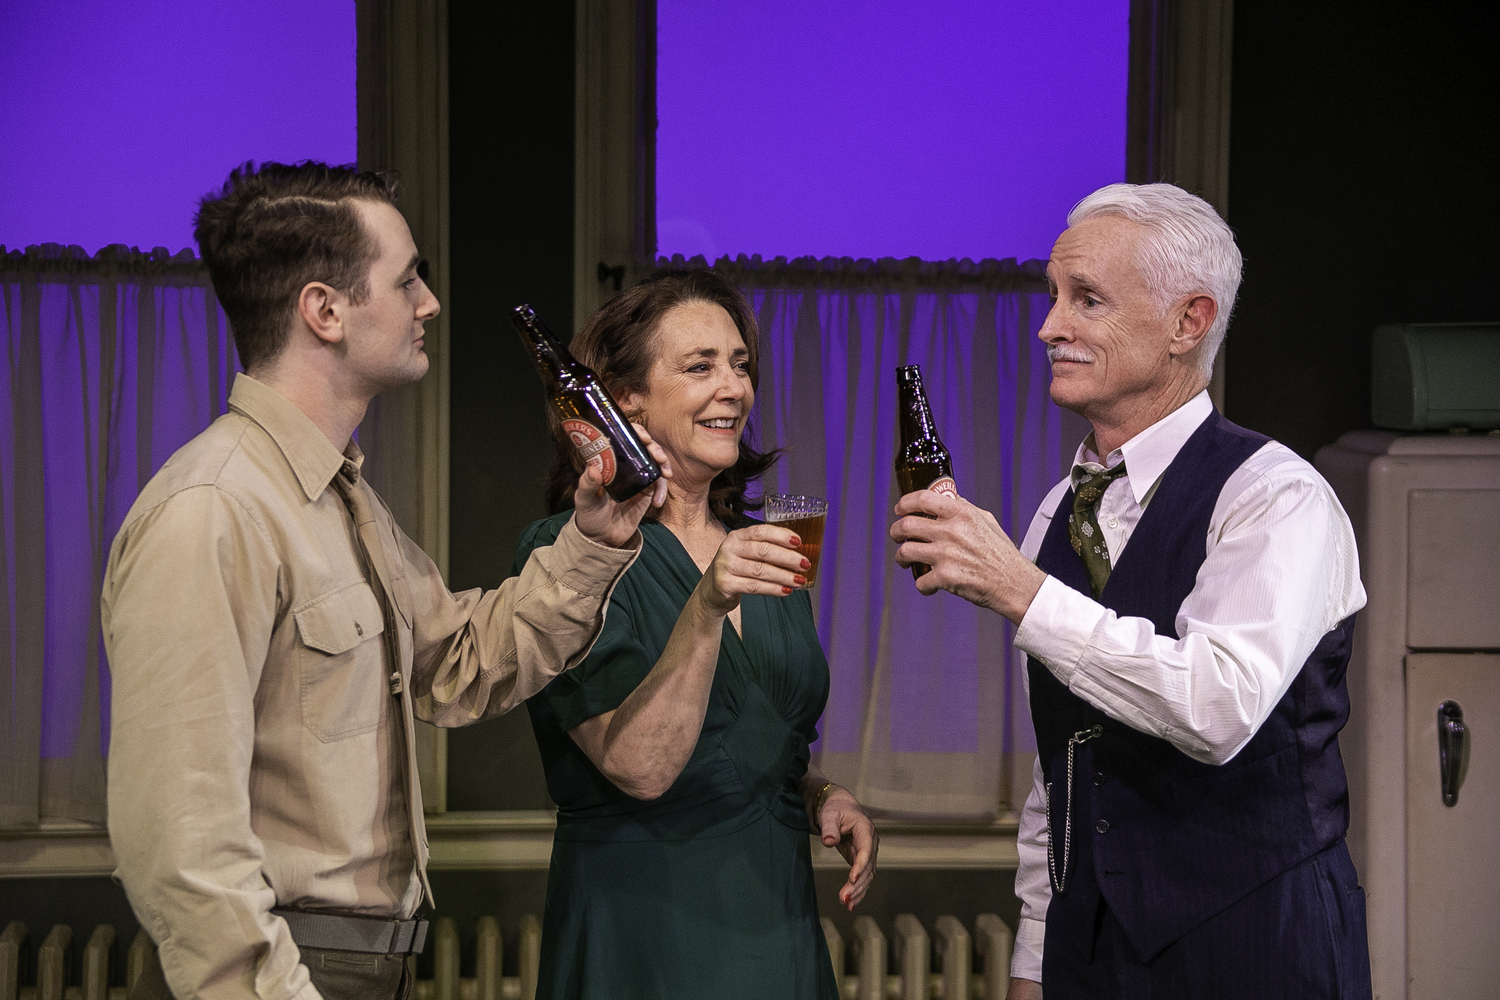 From left, Harry Slattery (as Timmy Cleary), Talia Balsam (as Nettie Cleary) and John Slattery (as John Cleary) in Bay Street Theater's production of 